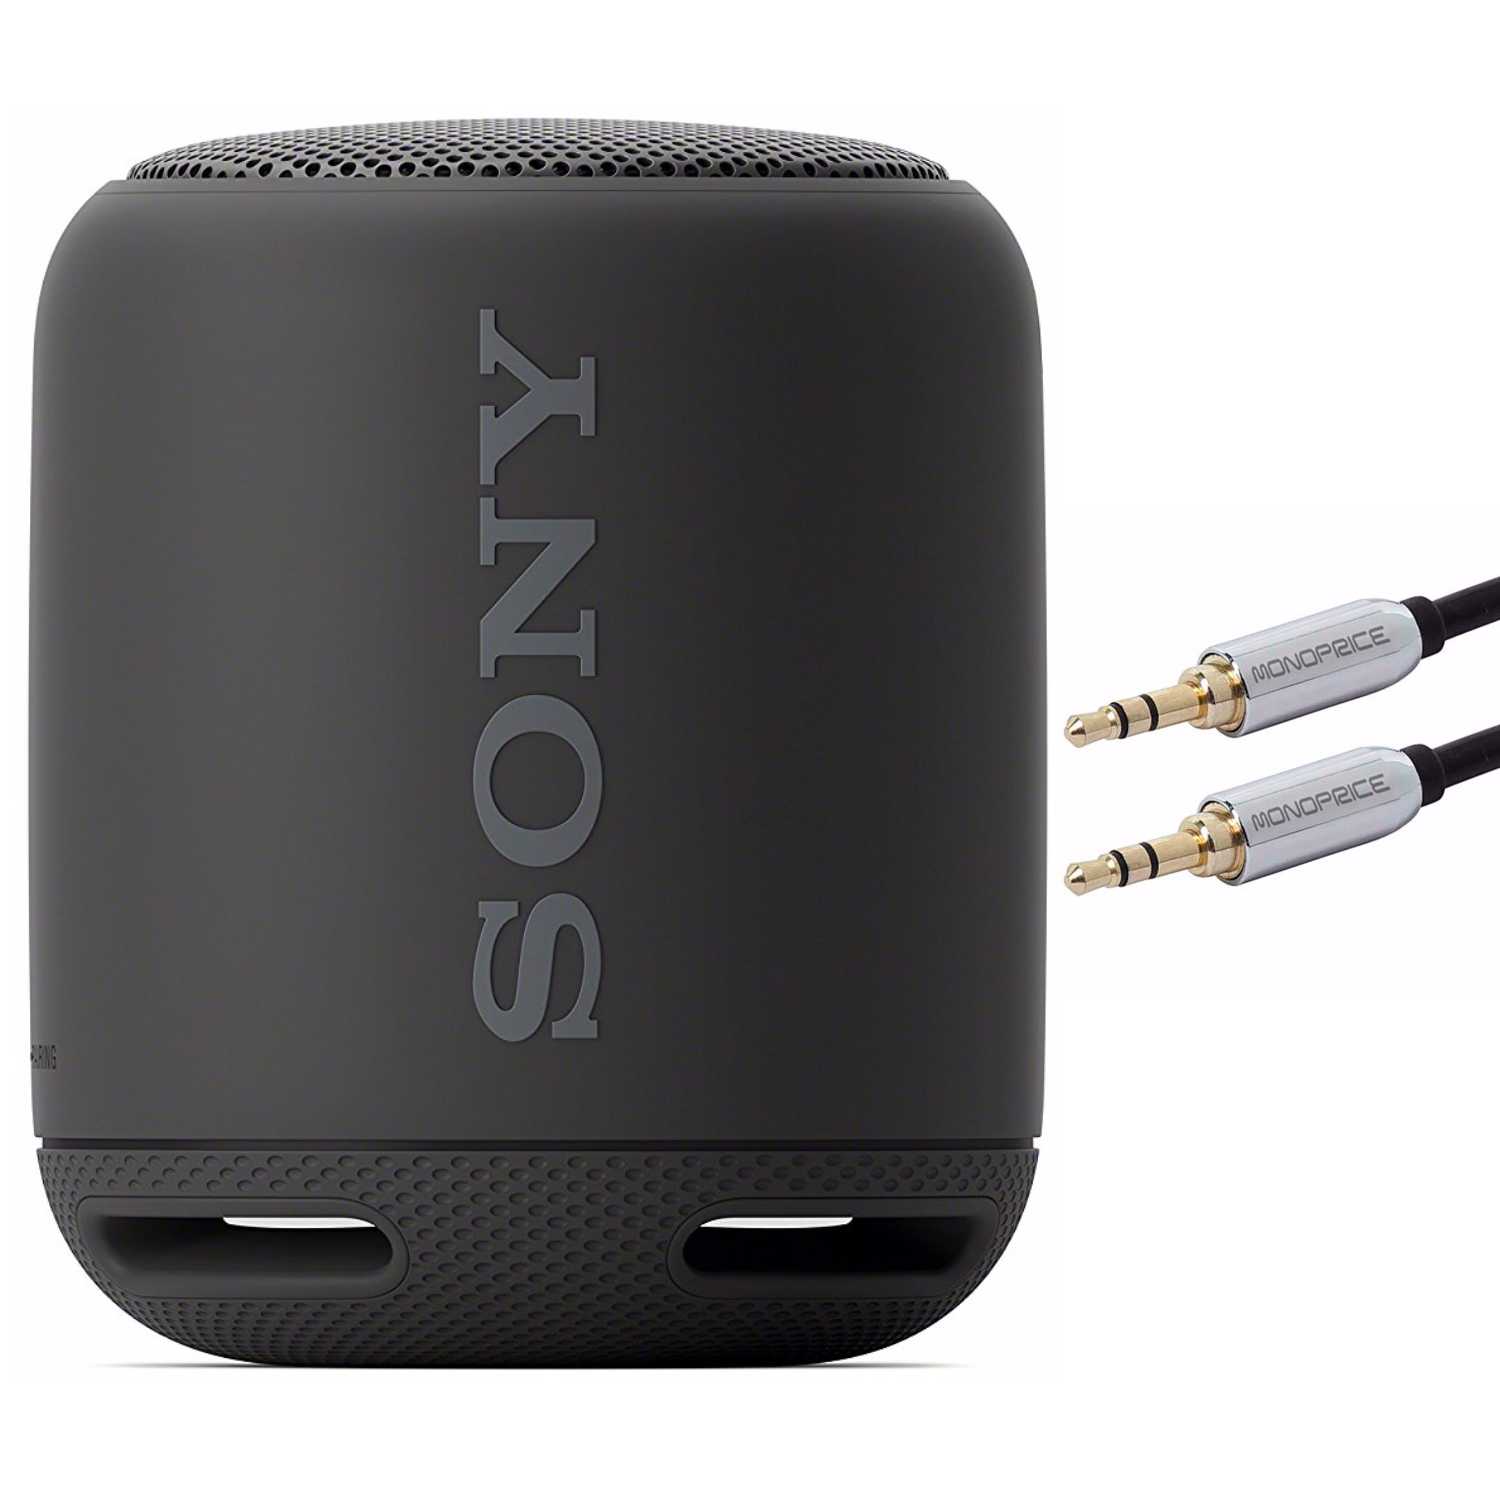 Sony SRS-XB10 Portable Wireless Bluetooth Speaker (Black) with 10ft Audio Cable - image 1 of 5